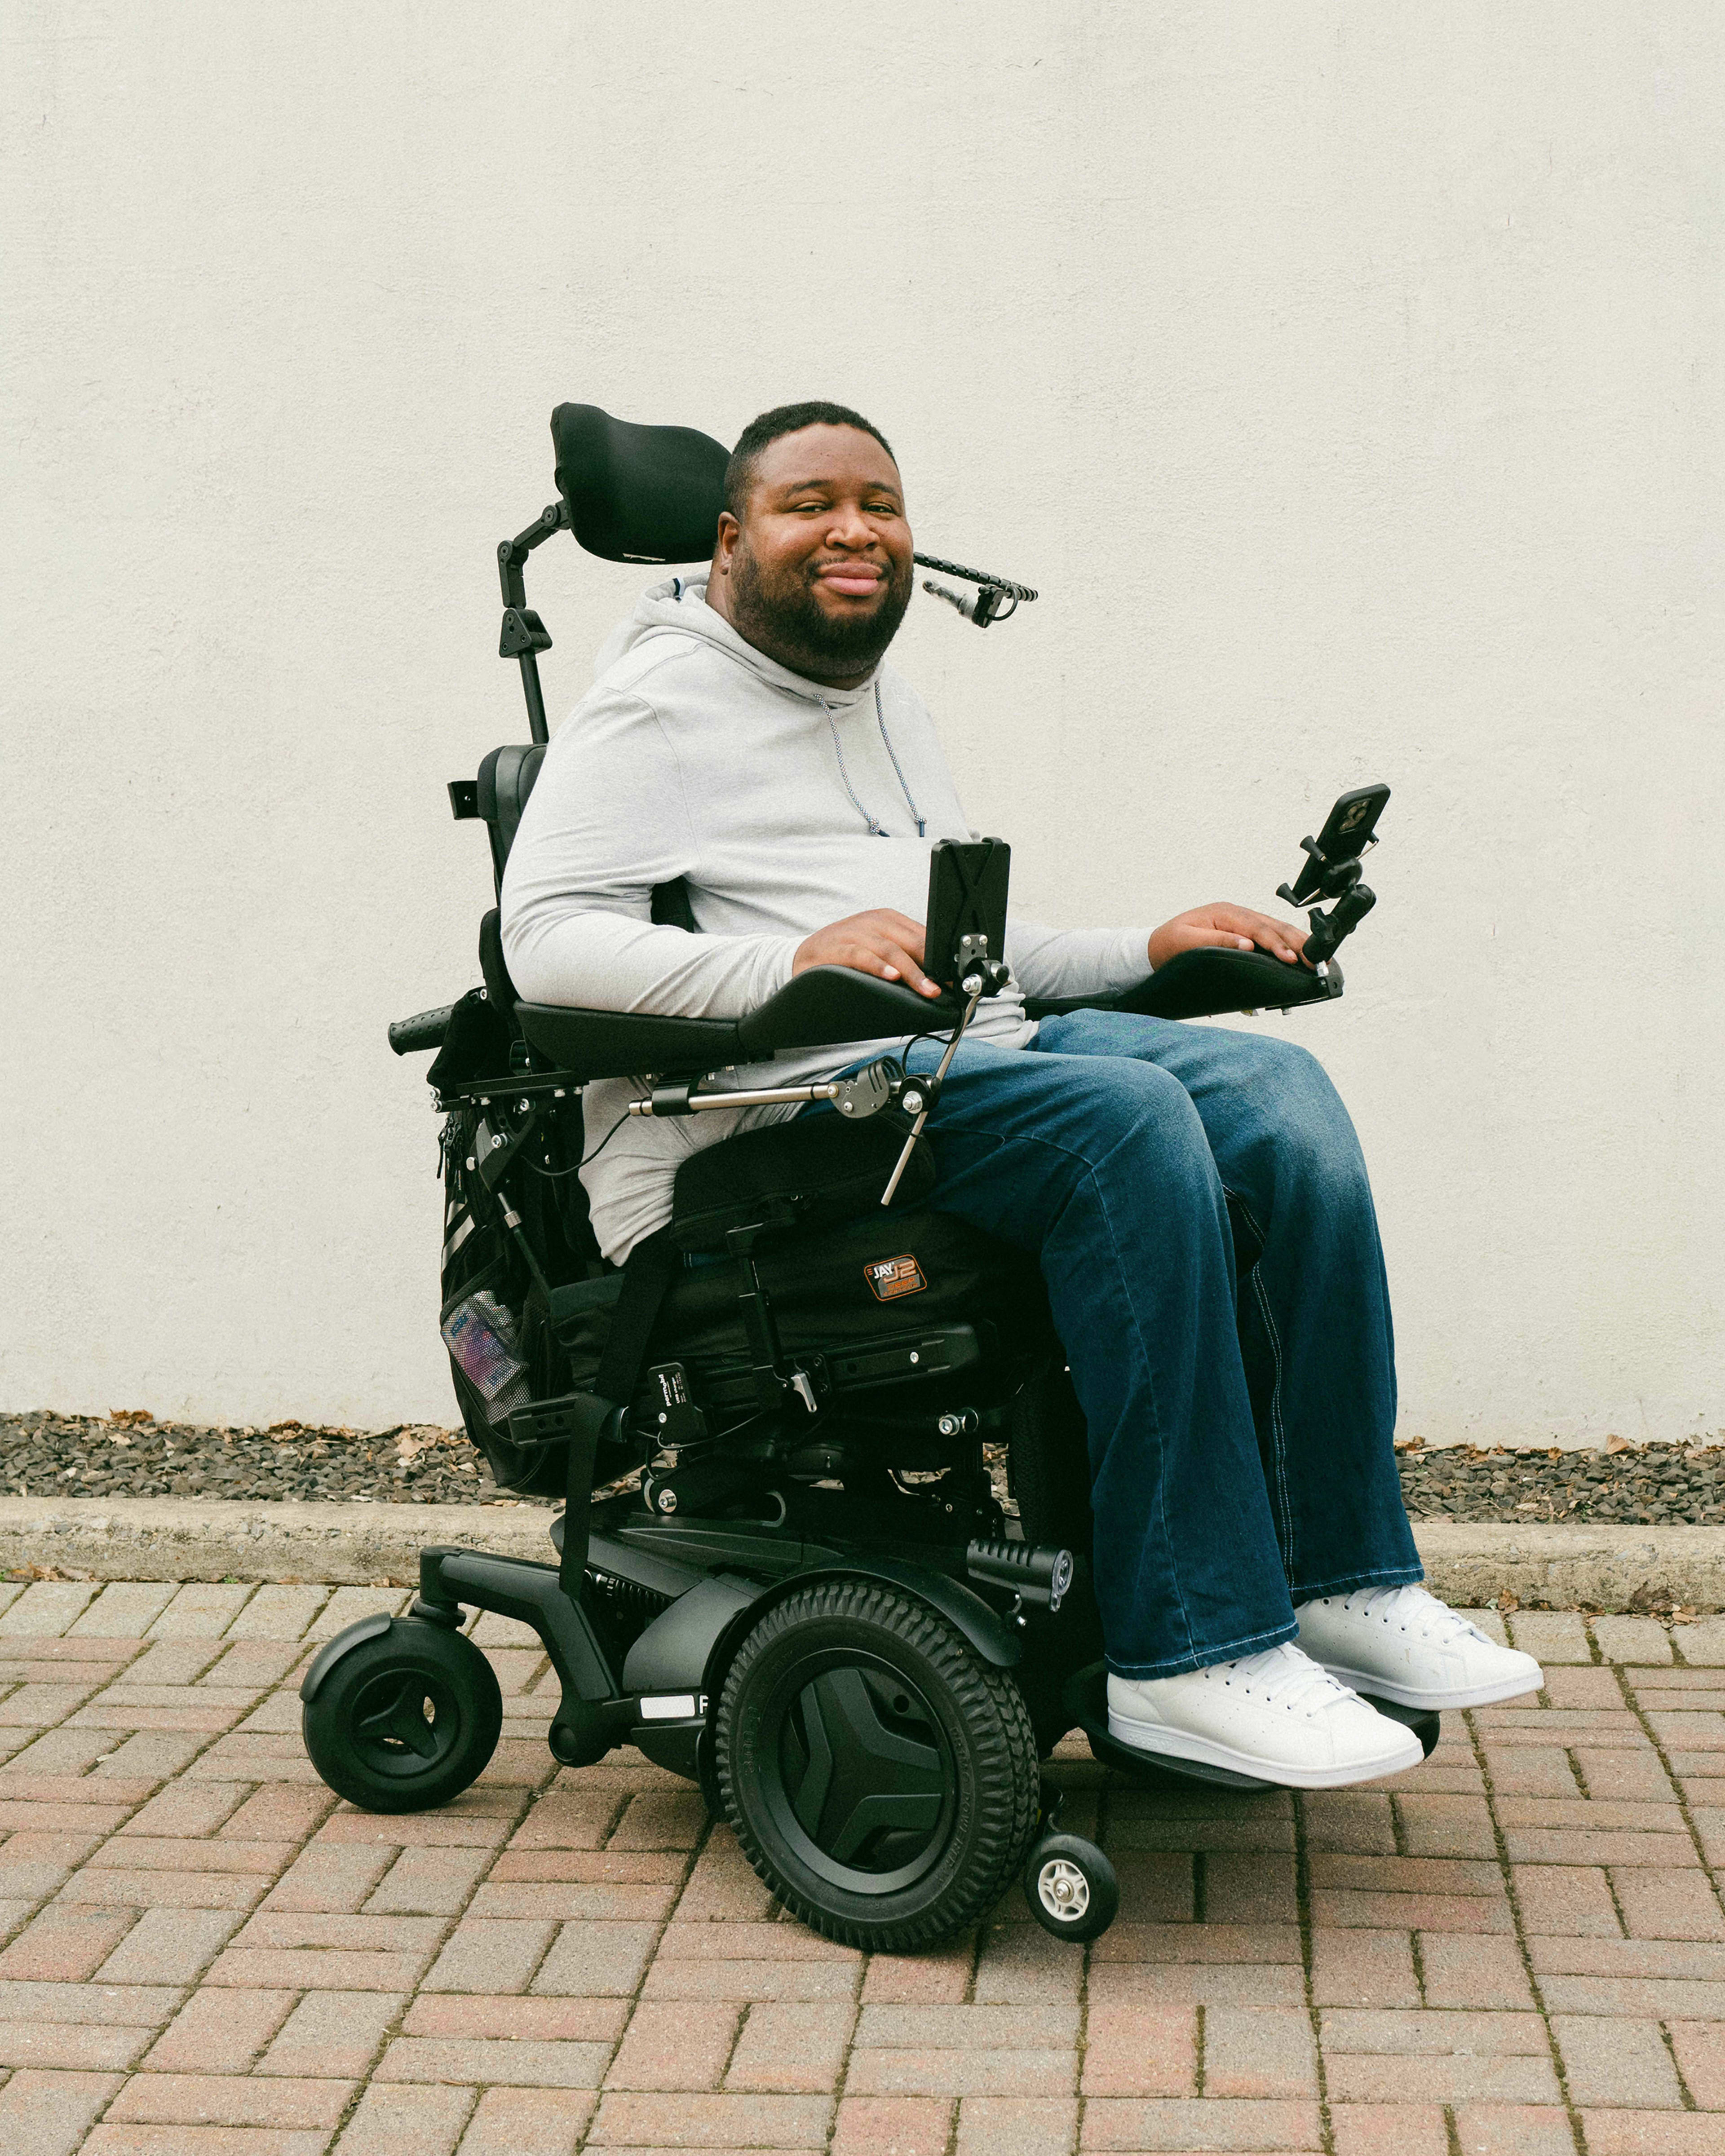 Paralyzed on the football field, Eric LeGrand still dreams of walking but is flying high as an entrepreneur